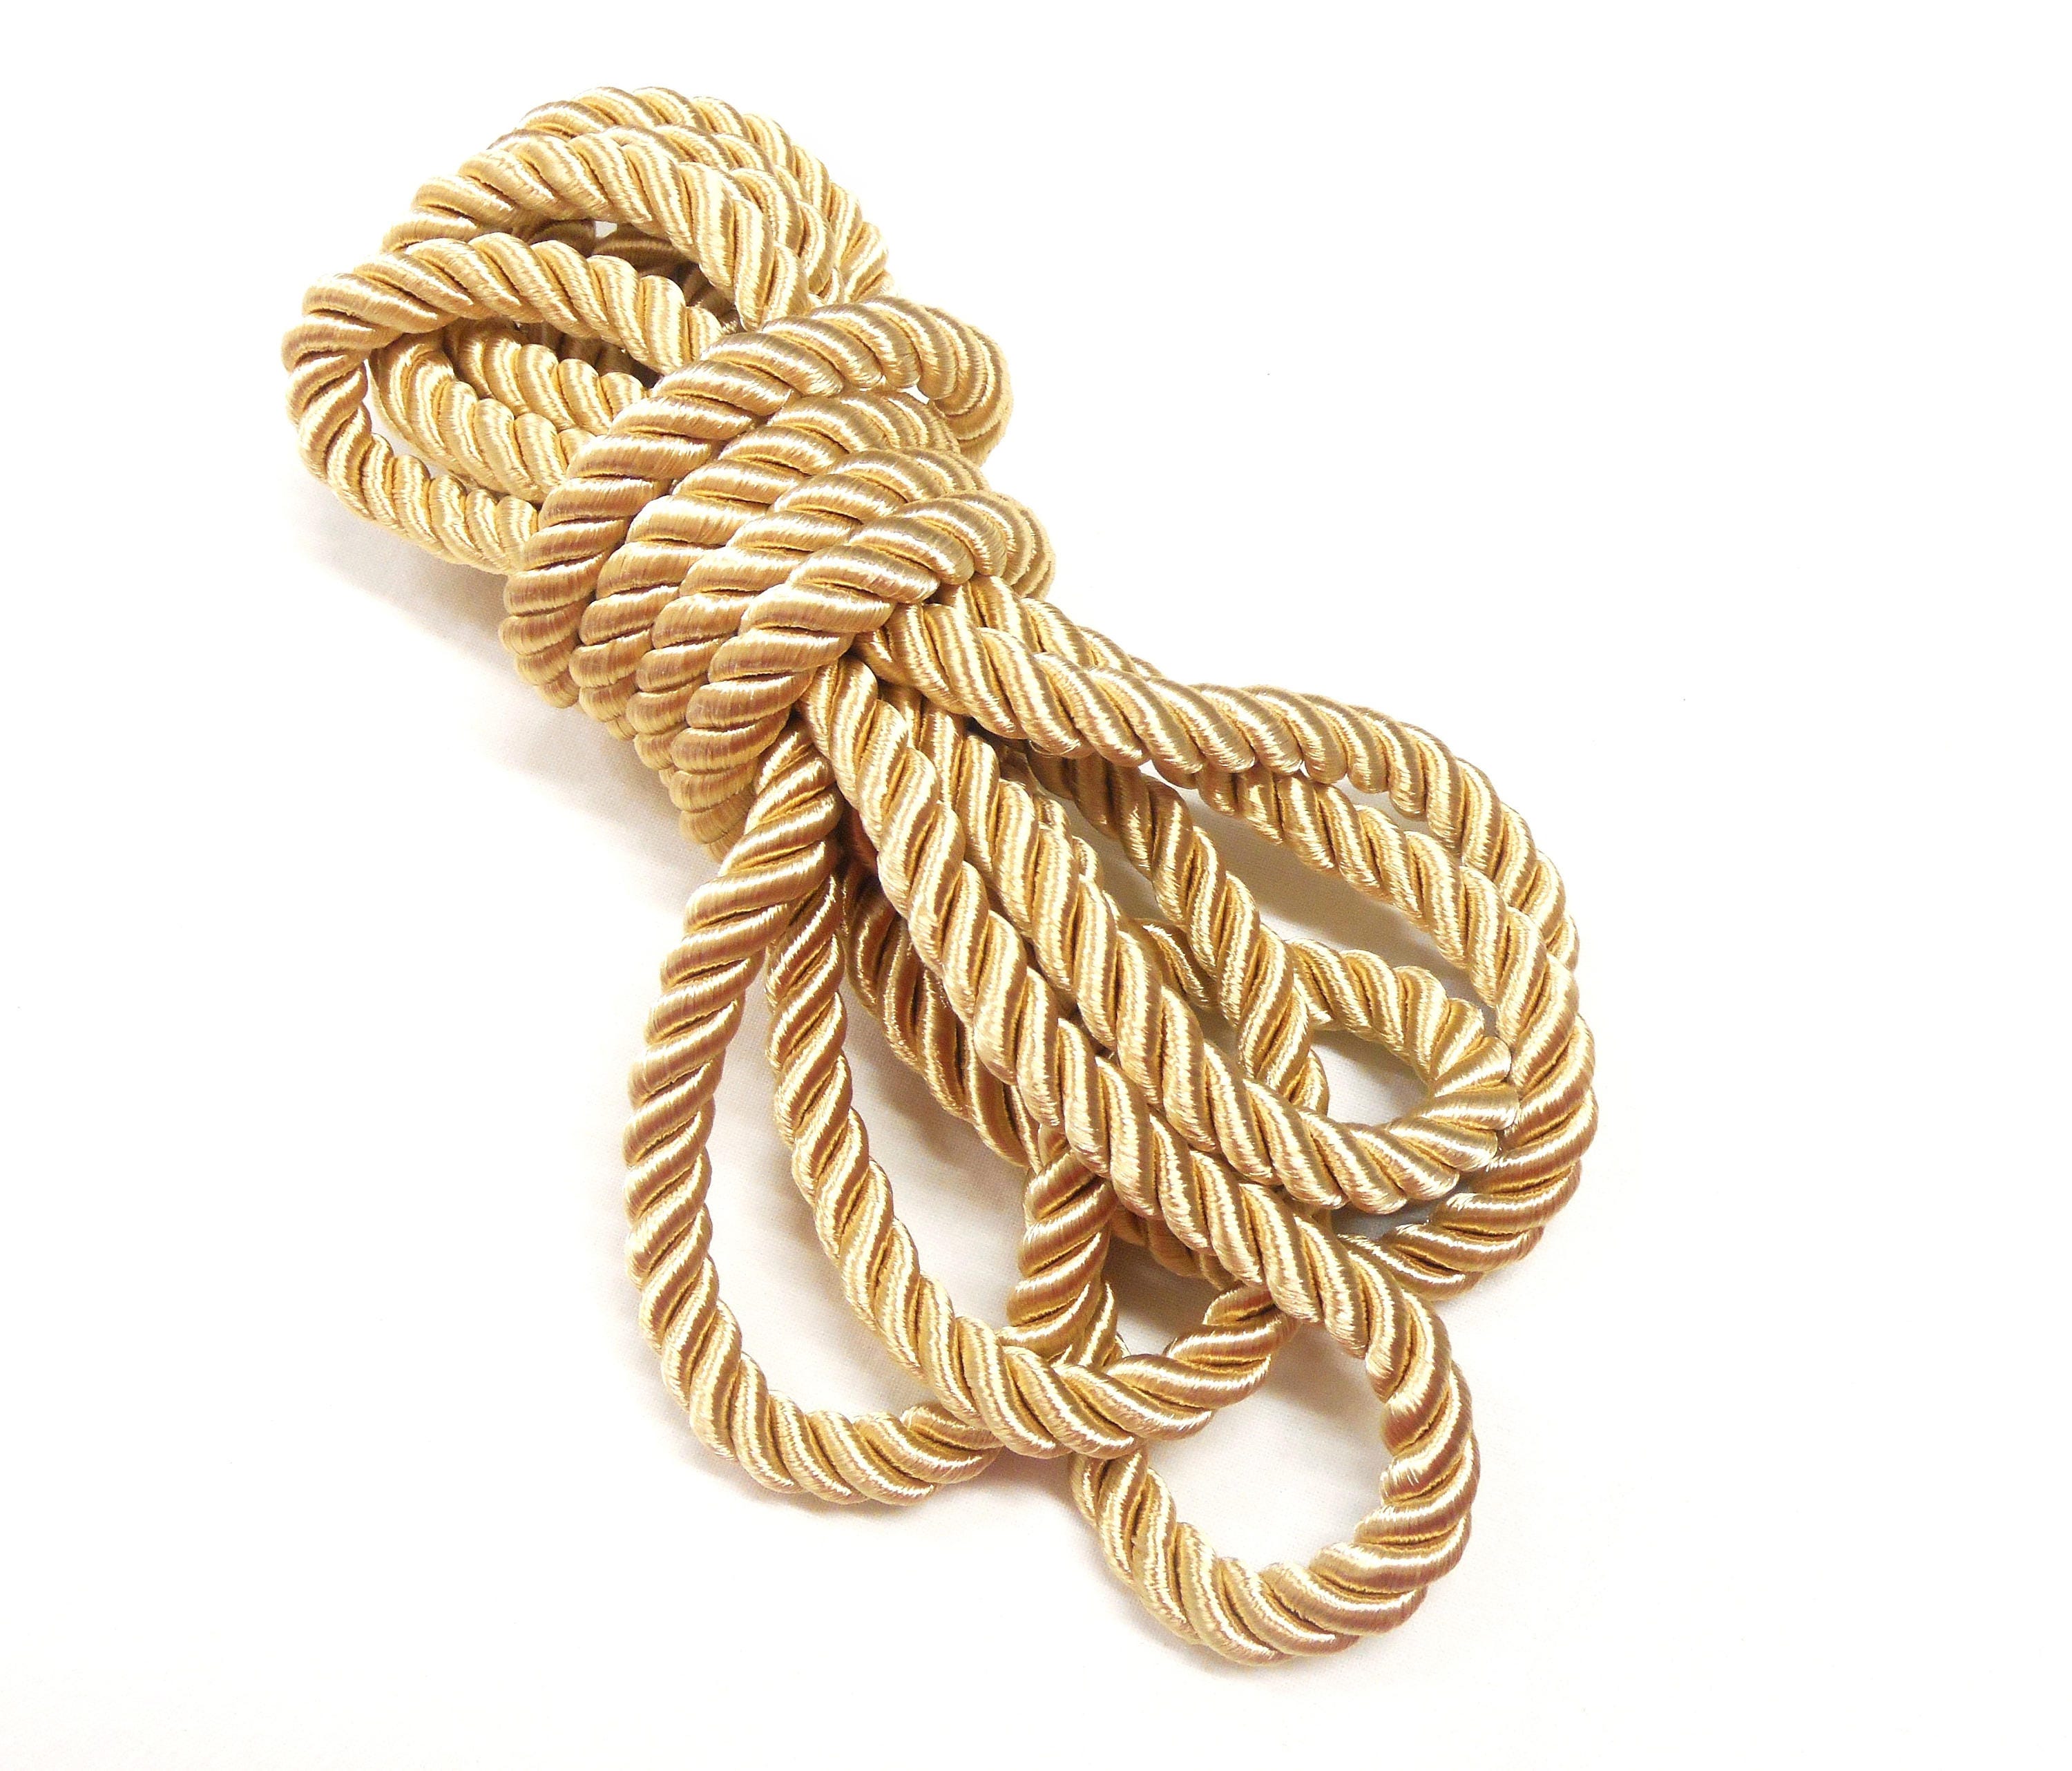 Champagne Satin Twisted Cord, Wrapped Thread Cord, 9mm Rope Cord 1 Yard/  0,92m Approx.1 Piece 